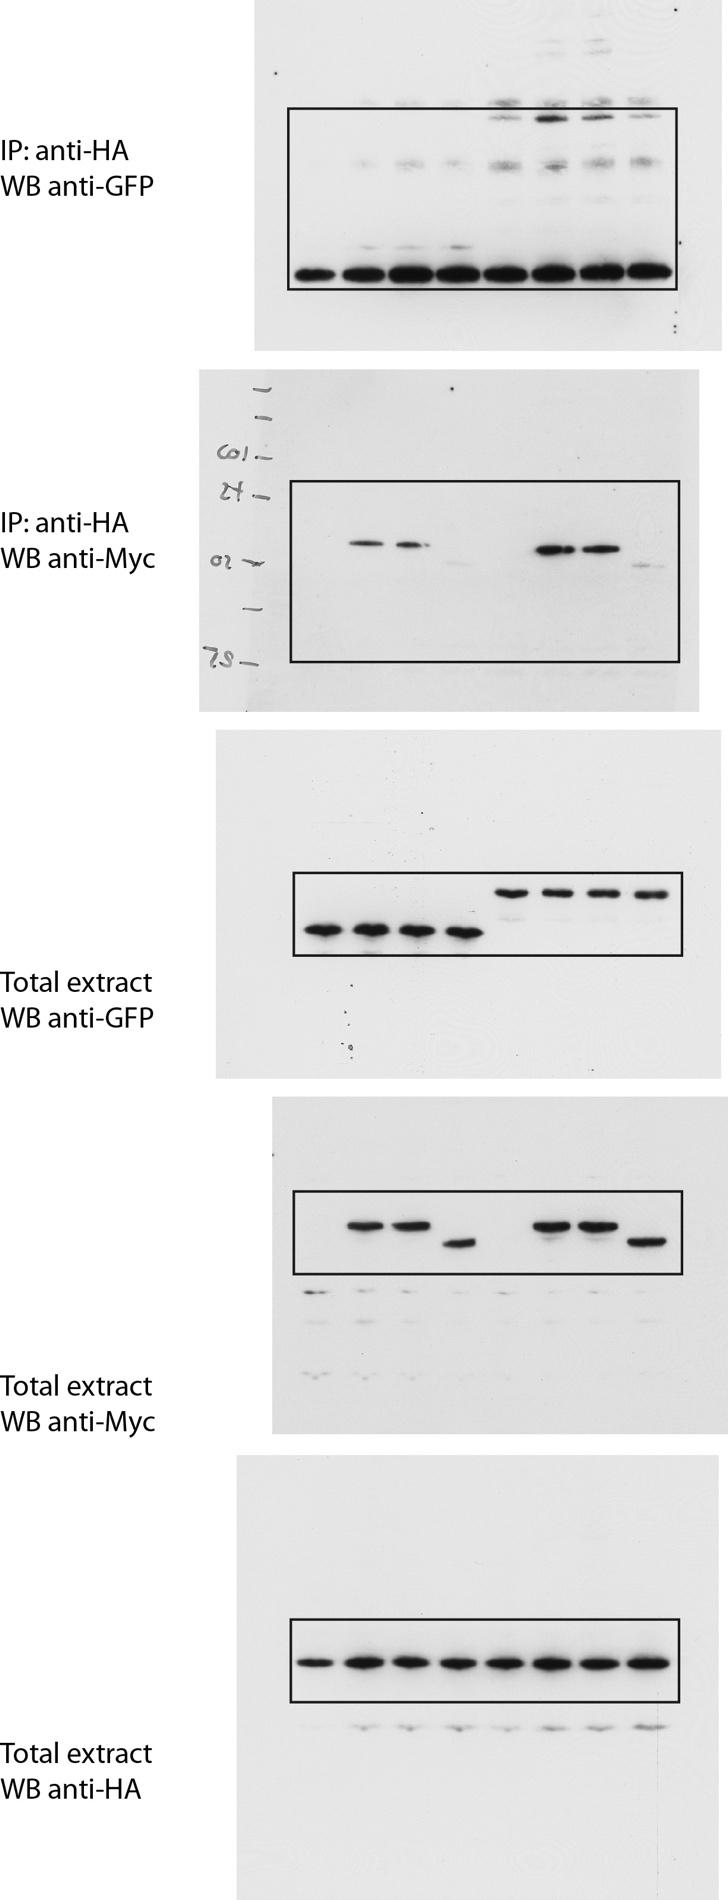 Supplementary Figure 17: Uncropped Western blots corresponding to